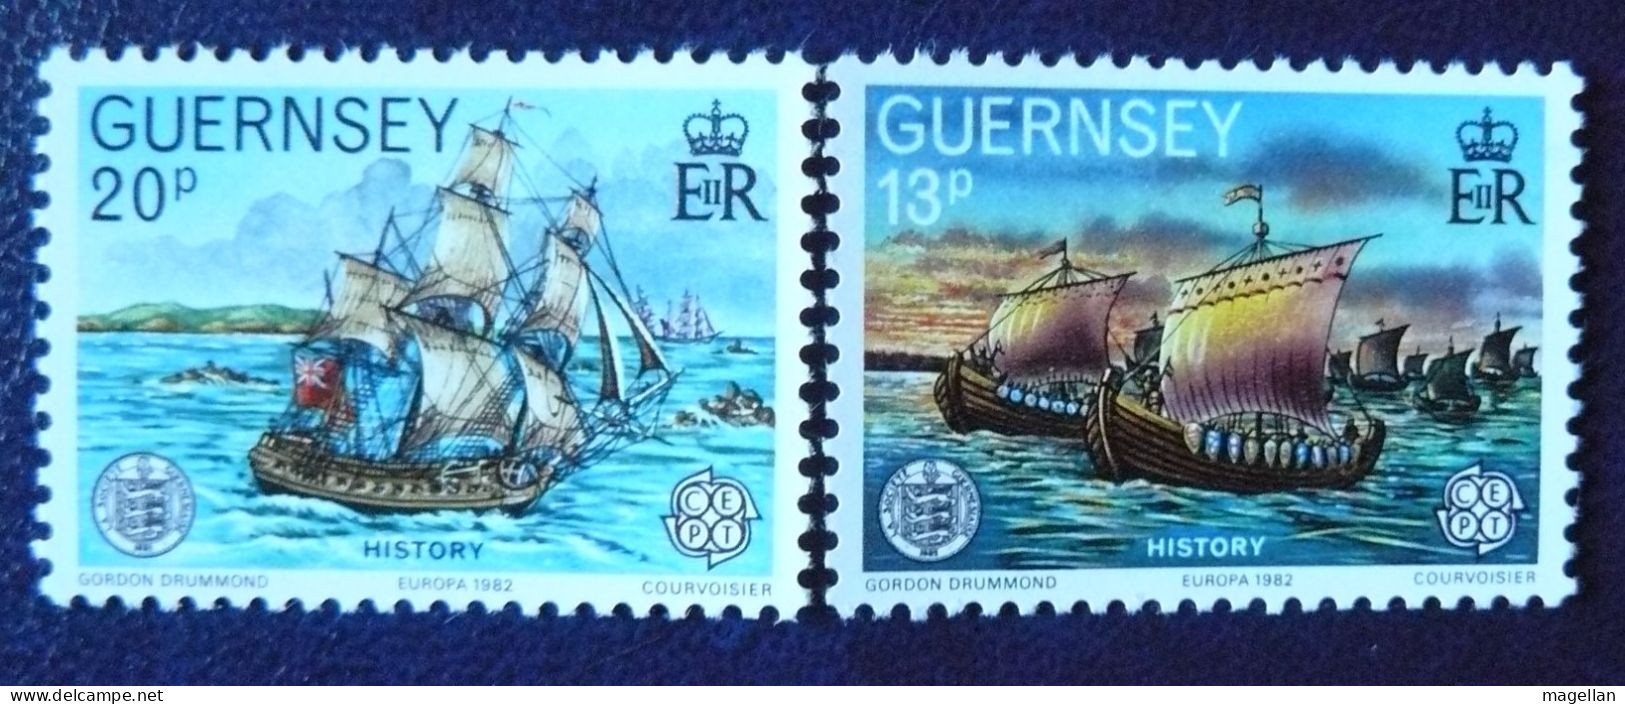 Gde-Bretagne Yv. 494 - 513 - 589 - 1619/1620 + Parcel stamp & Guernesey 248-249 neufs ** (MNH) - Bateaux - Voiliers